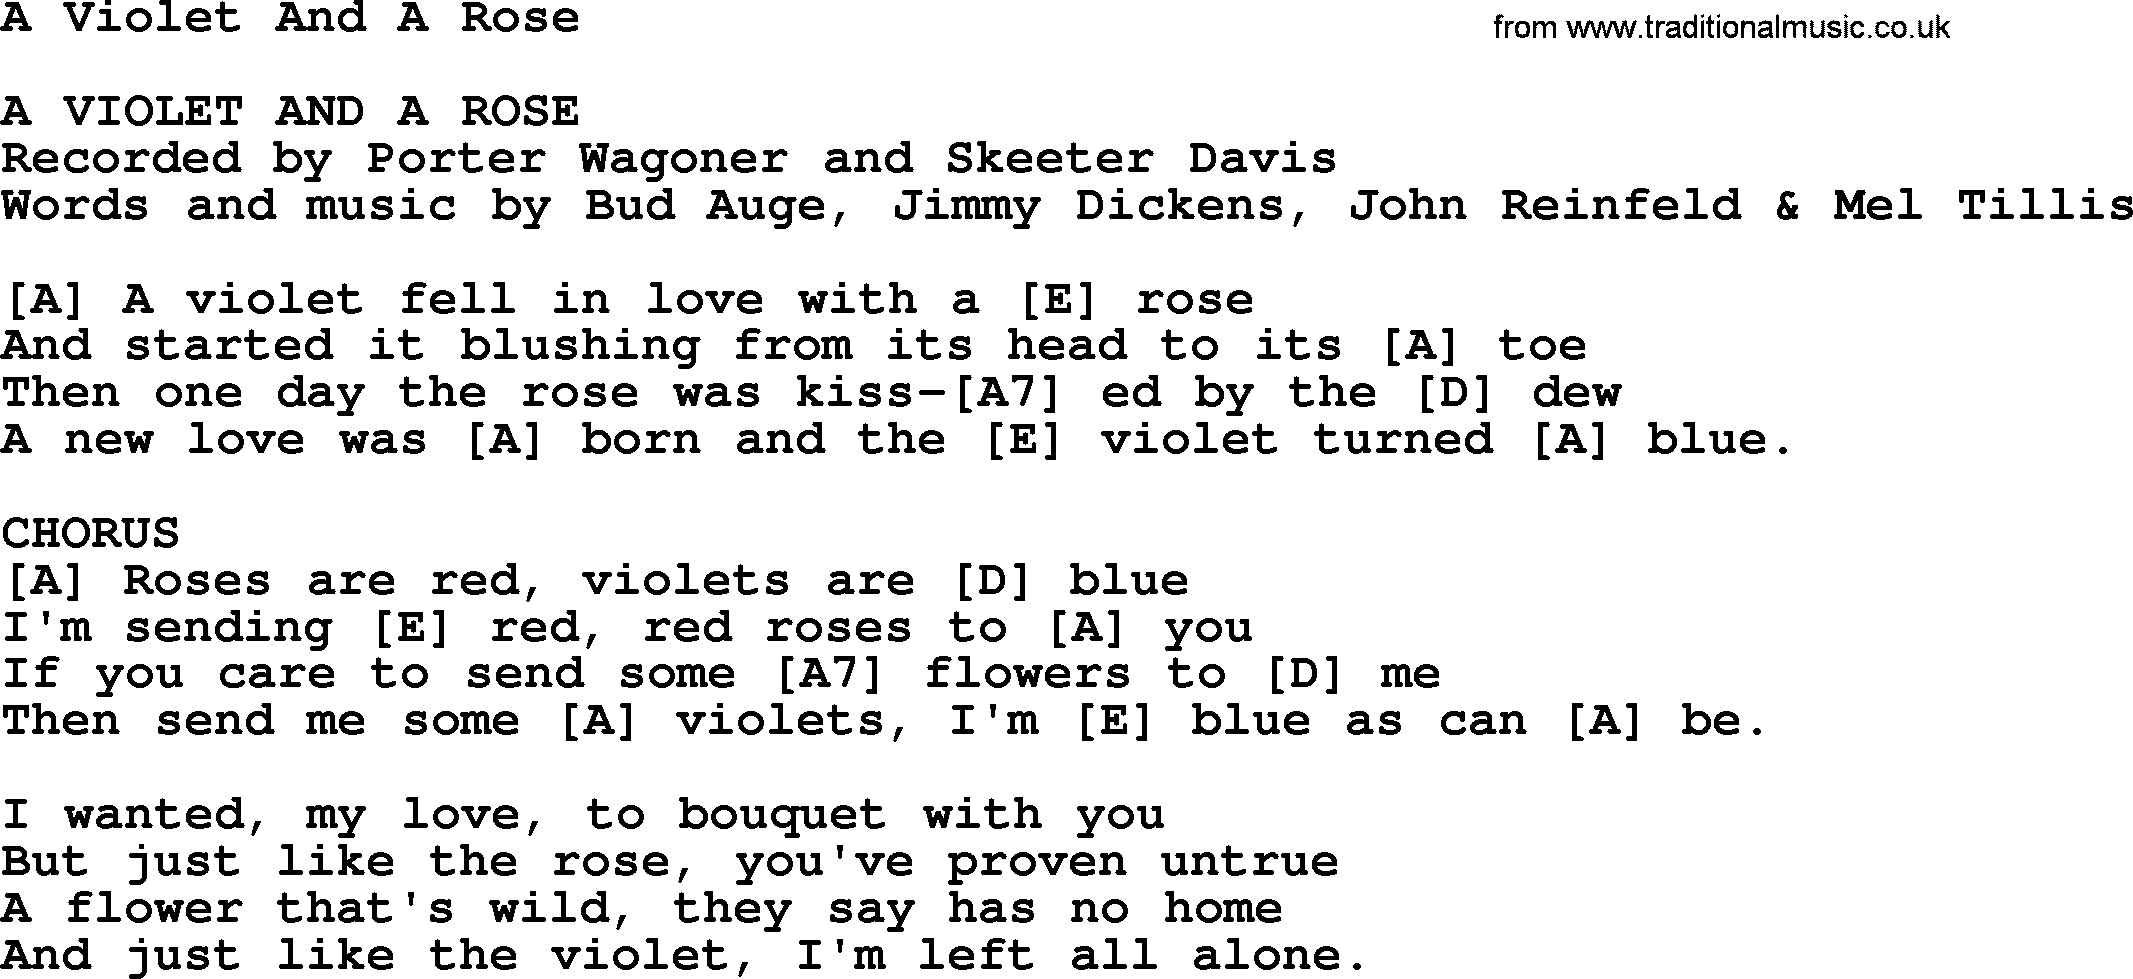 A Violet And A Rose - Bluegrass lyrics with chords